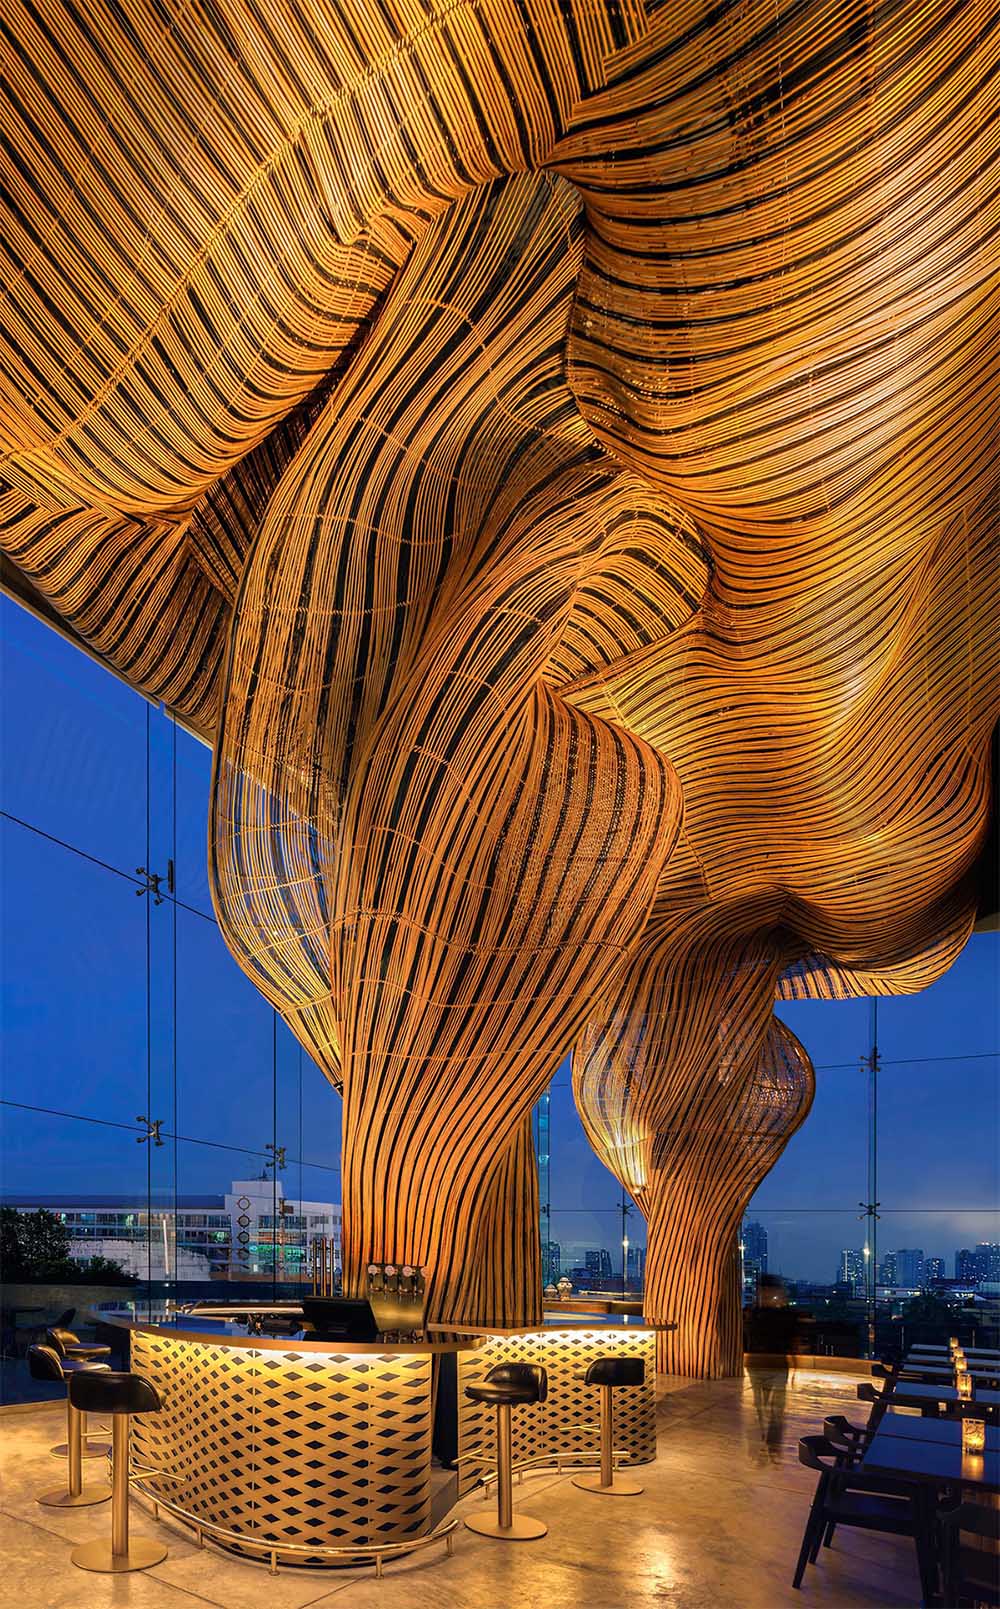 A modern restaurant with a glass facade that showcases flowing rattan sculptures inside.